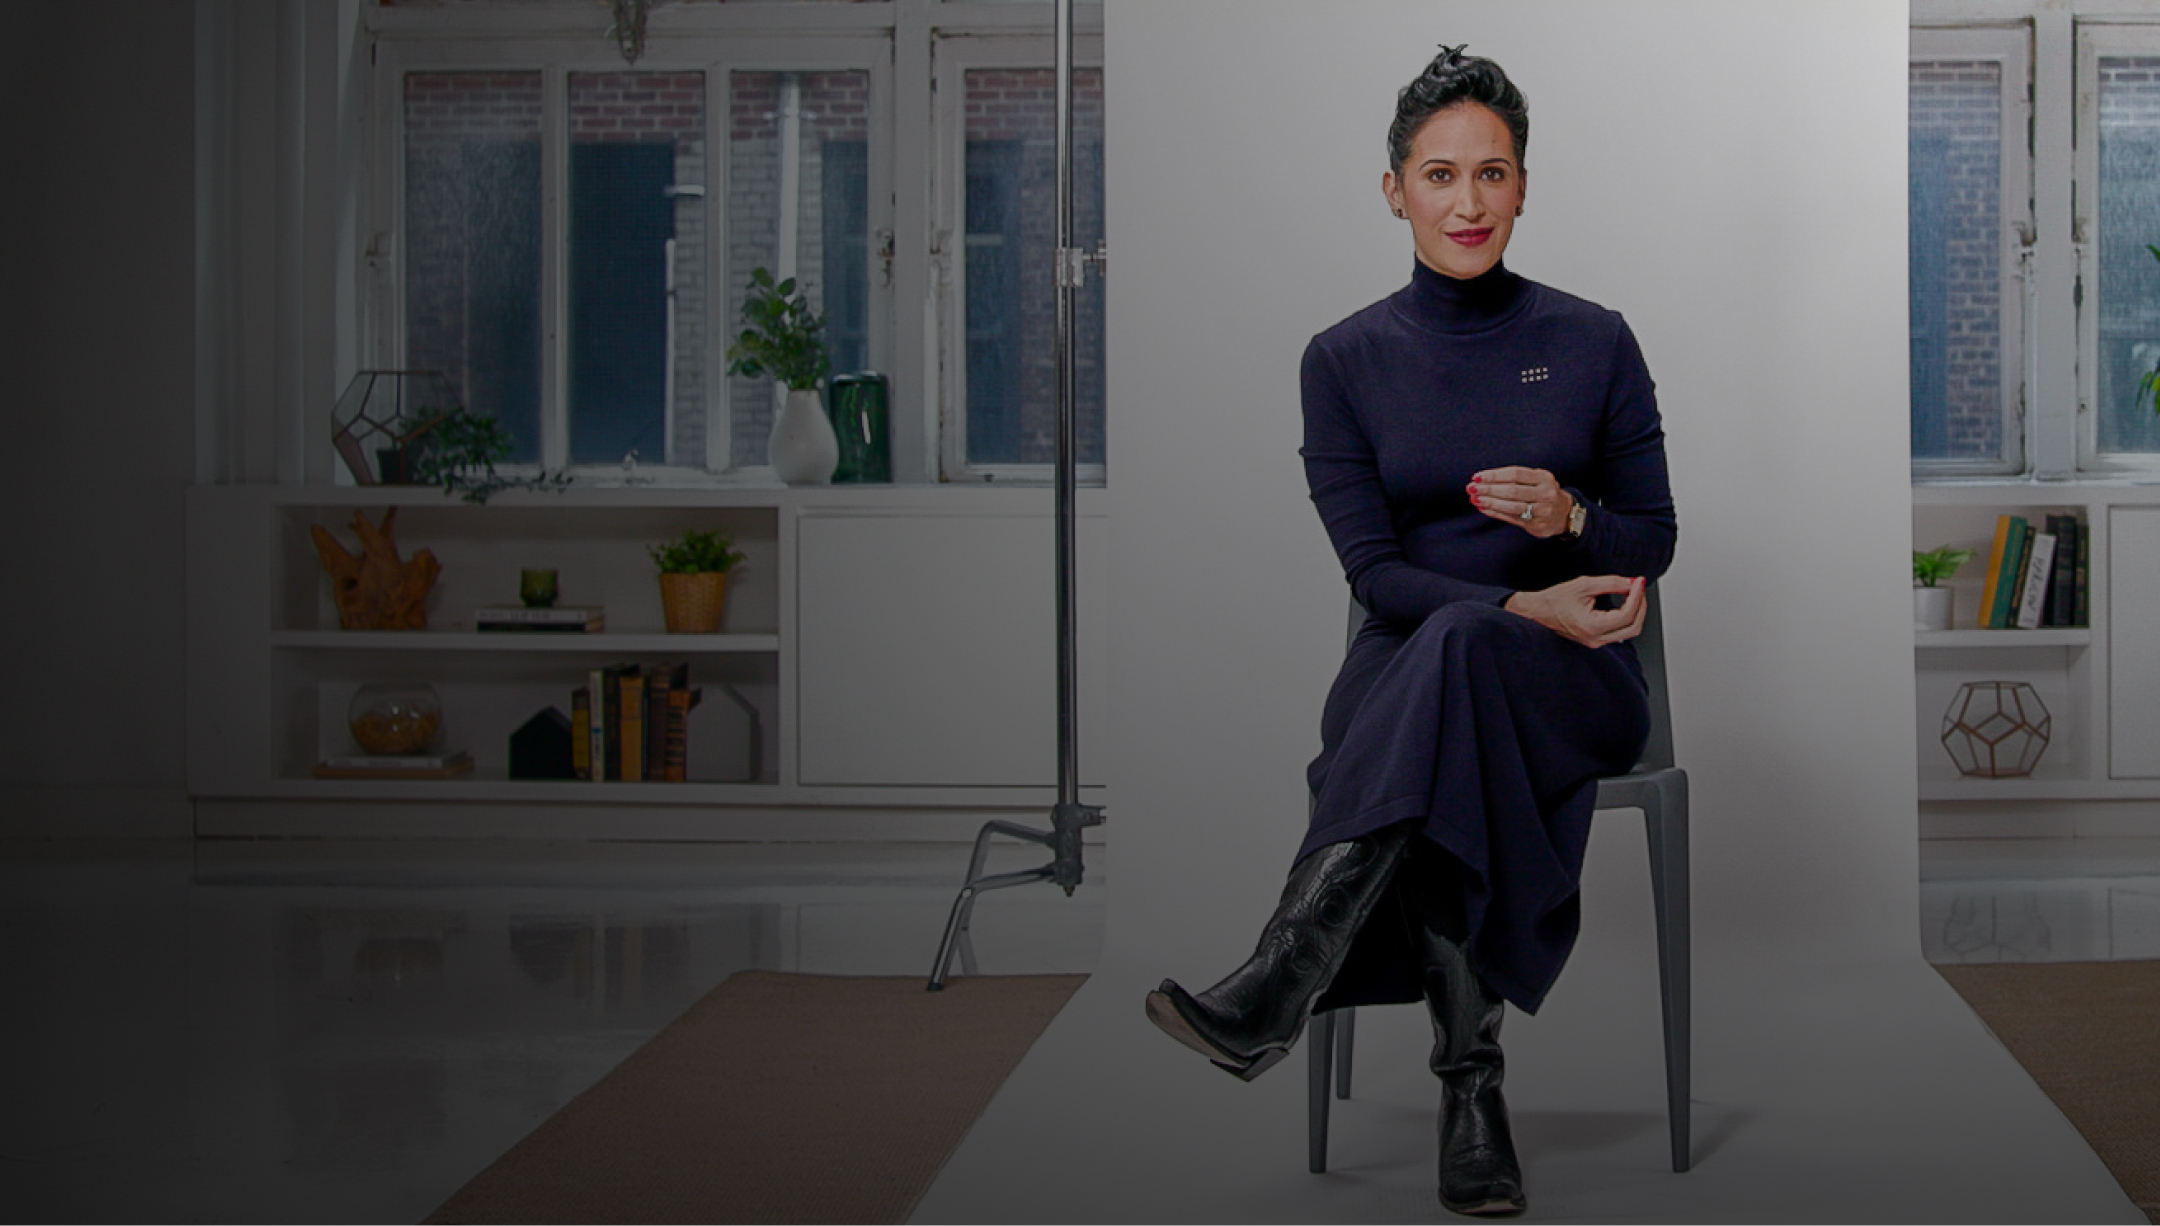 A woman in a dark turtleneck and long skirt sits on a stool in a stylish room with bookshelves, holding a cup, looking at the camera.